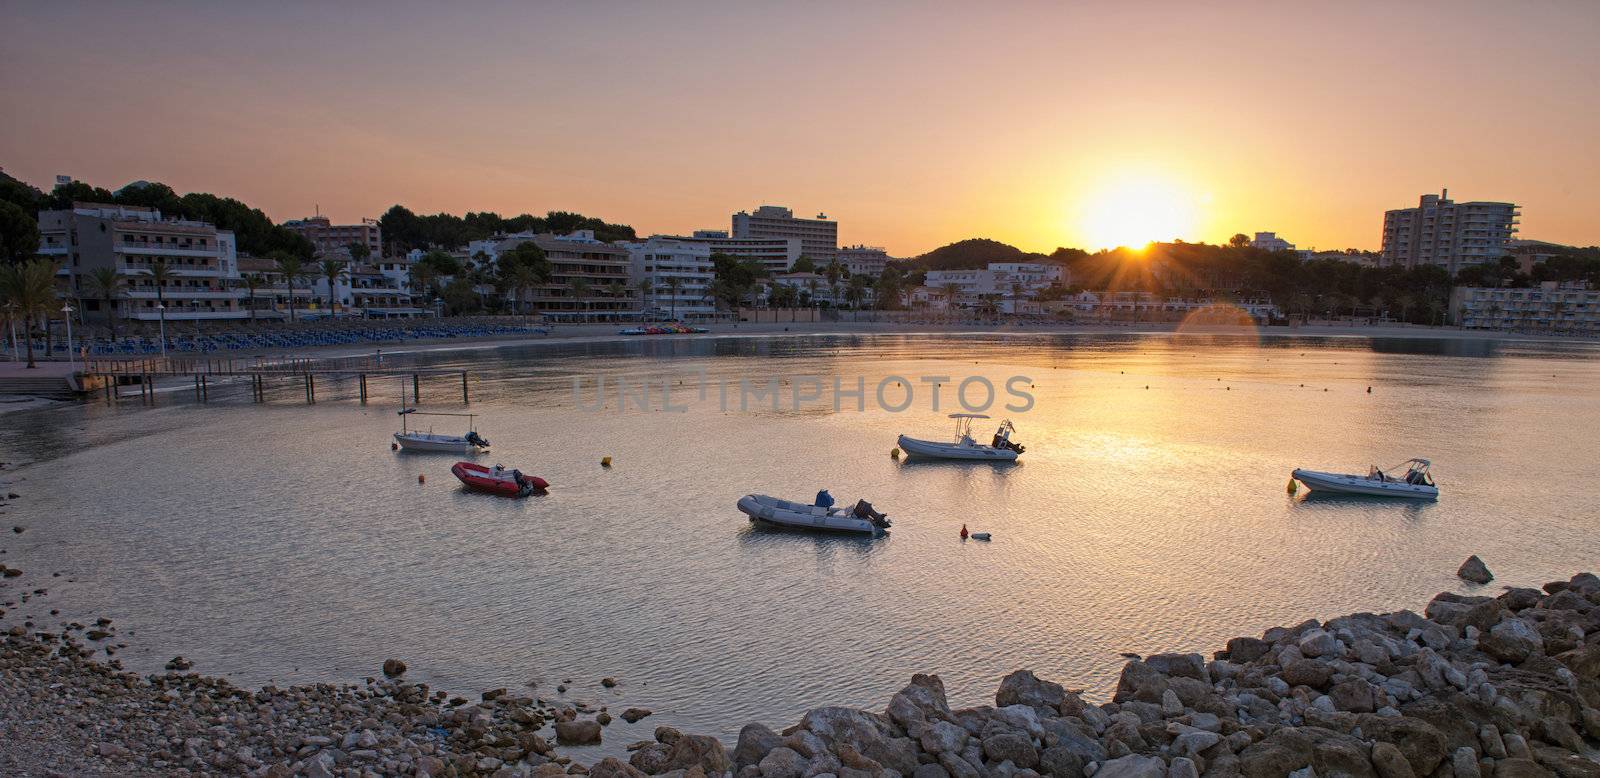 Beach of Paguera in Majorca at Sunset by Rainman